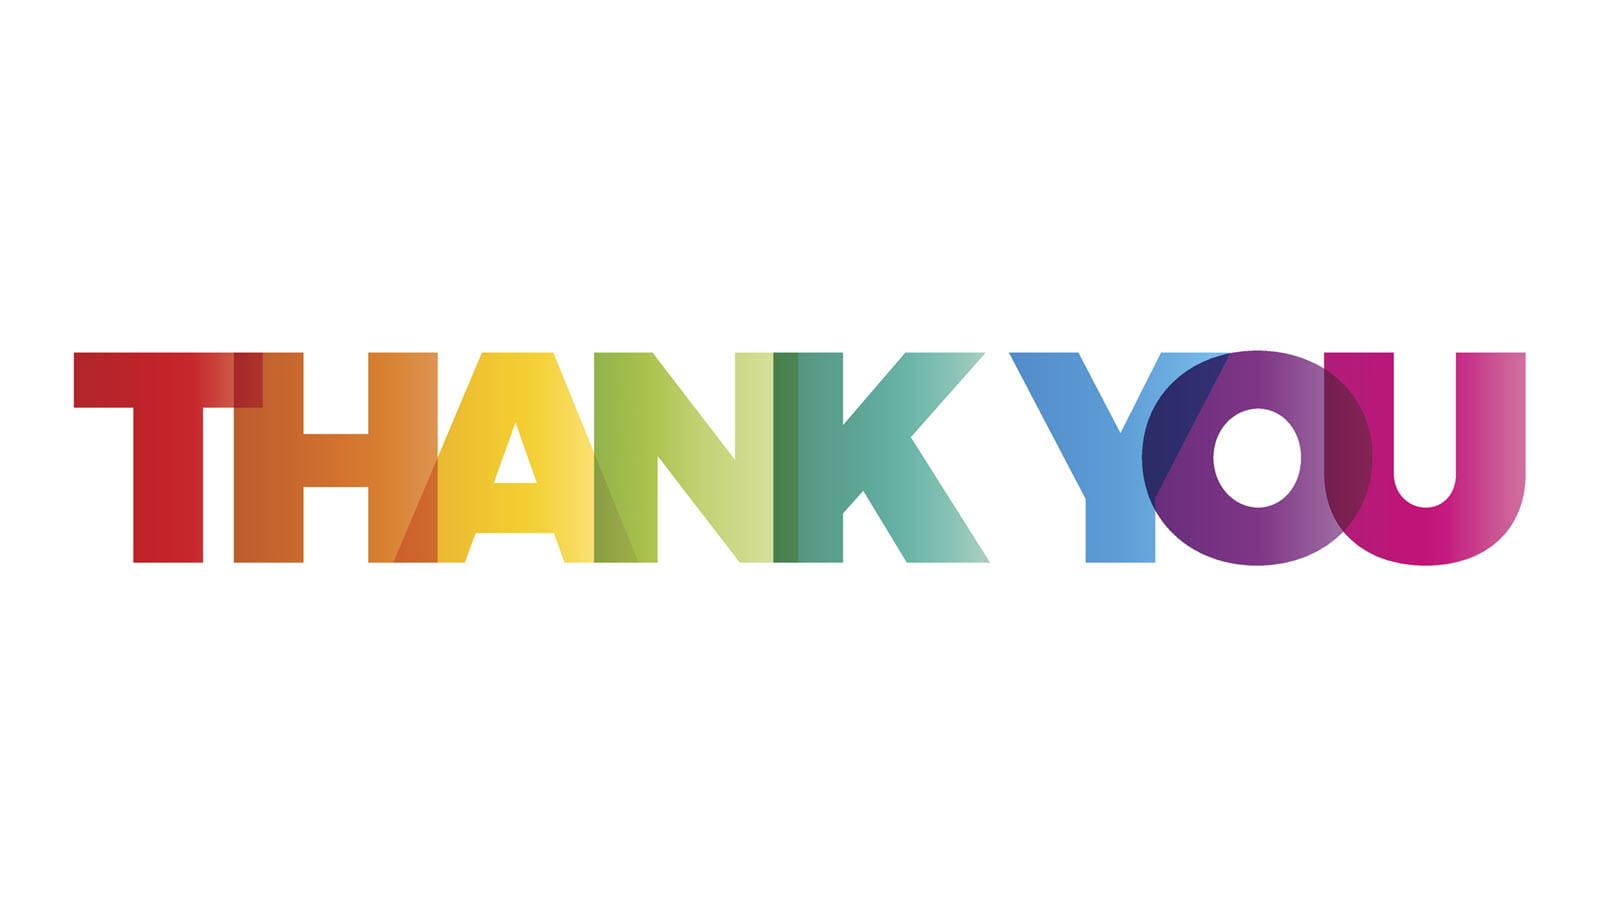 the word "THANK YOU" in rainbow letters